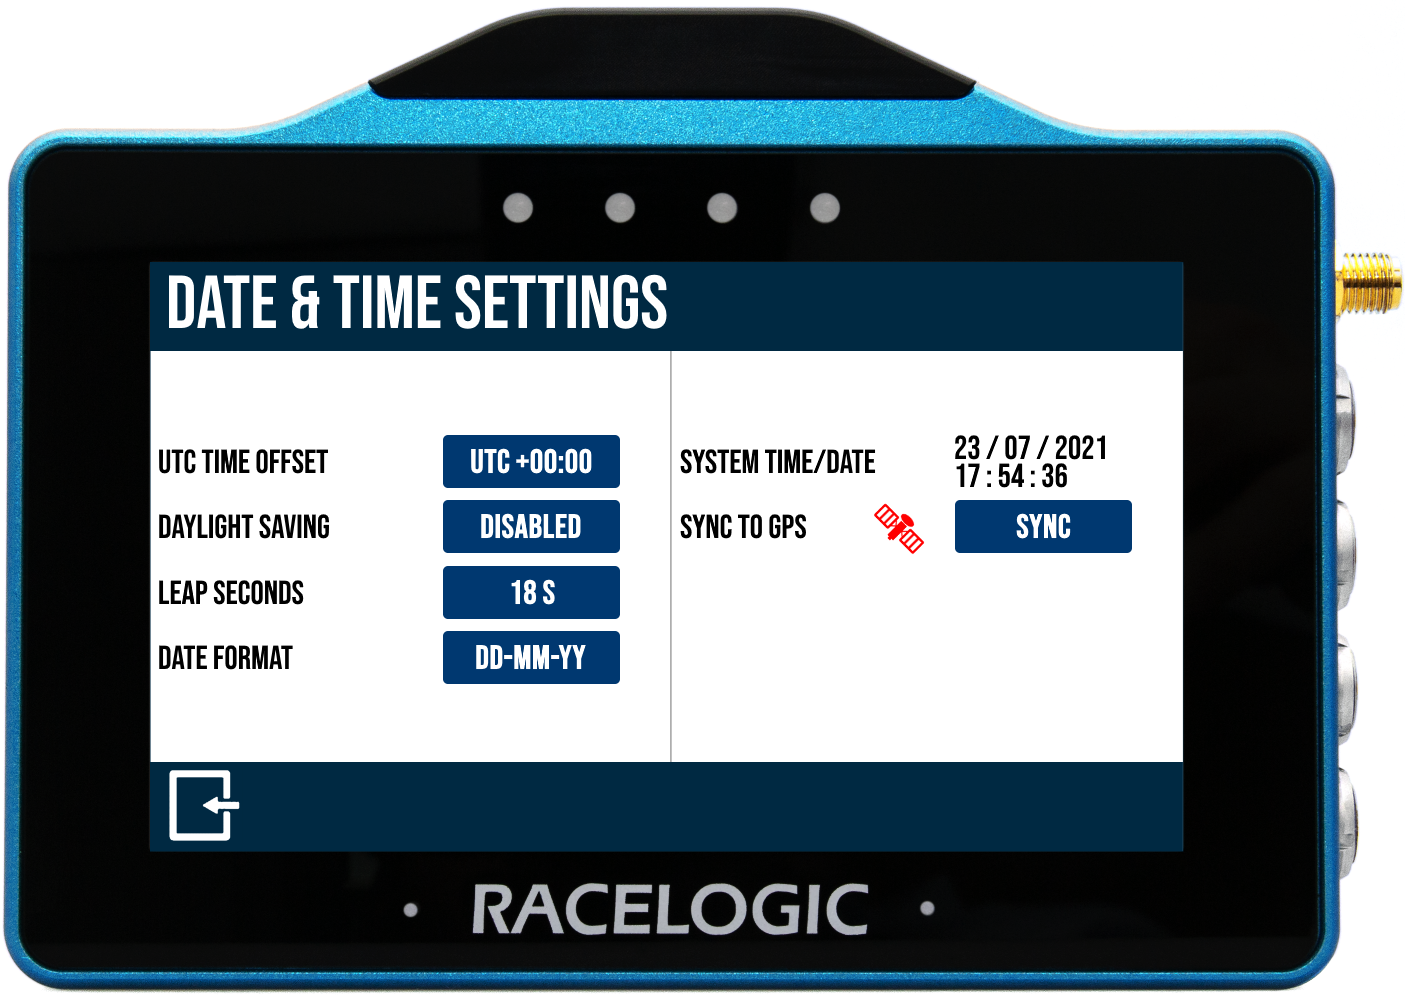 VBOX TOUCH FW v1.5 - Date & Time Settings.png